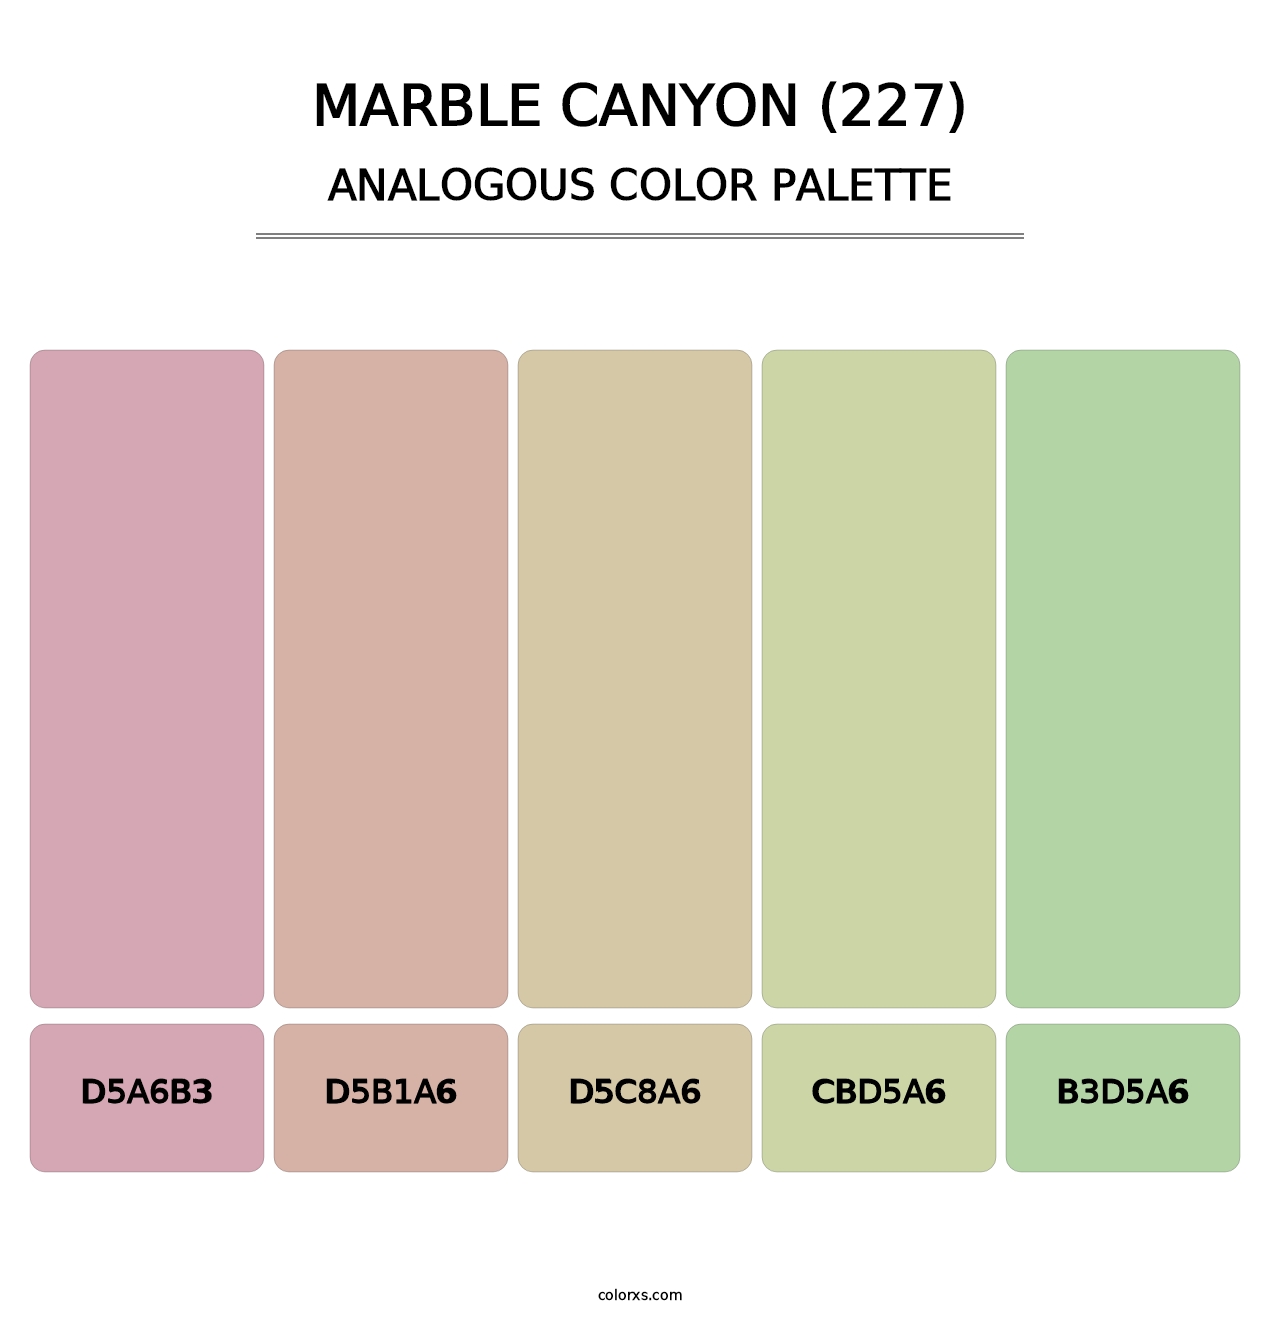 Marble Canyon (227) - Analogous Color Palette